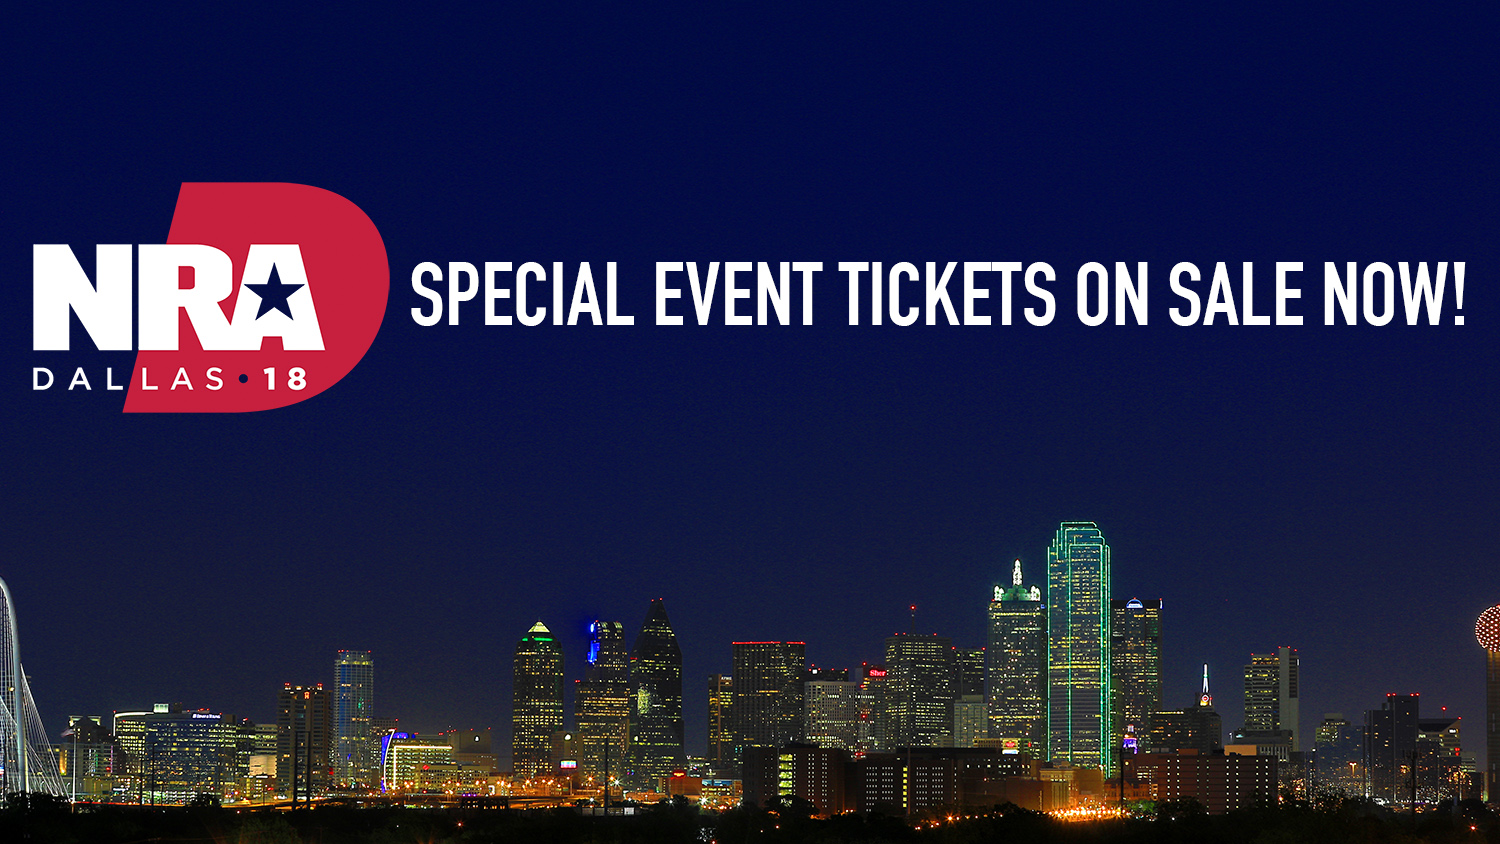 Tickets On Sale Now for Special Events at NRAAM in Dallas!